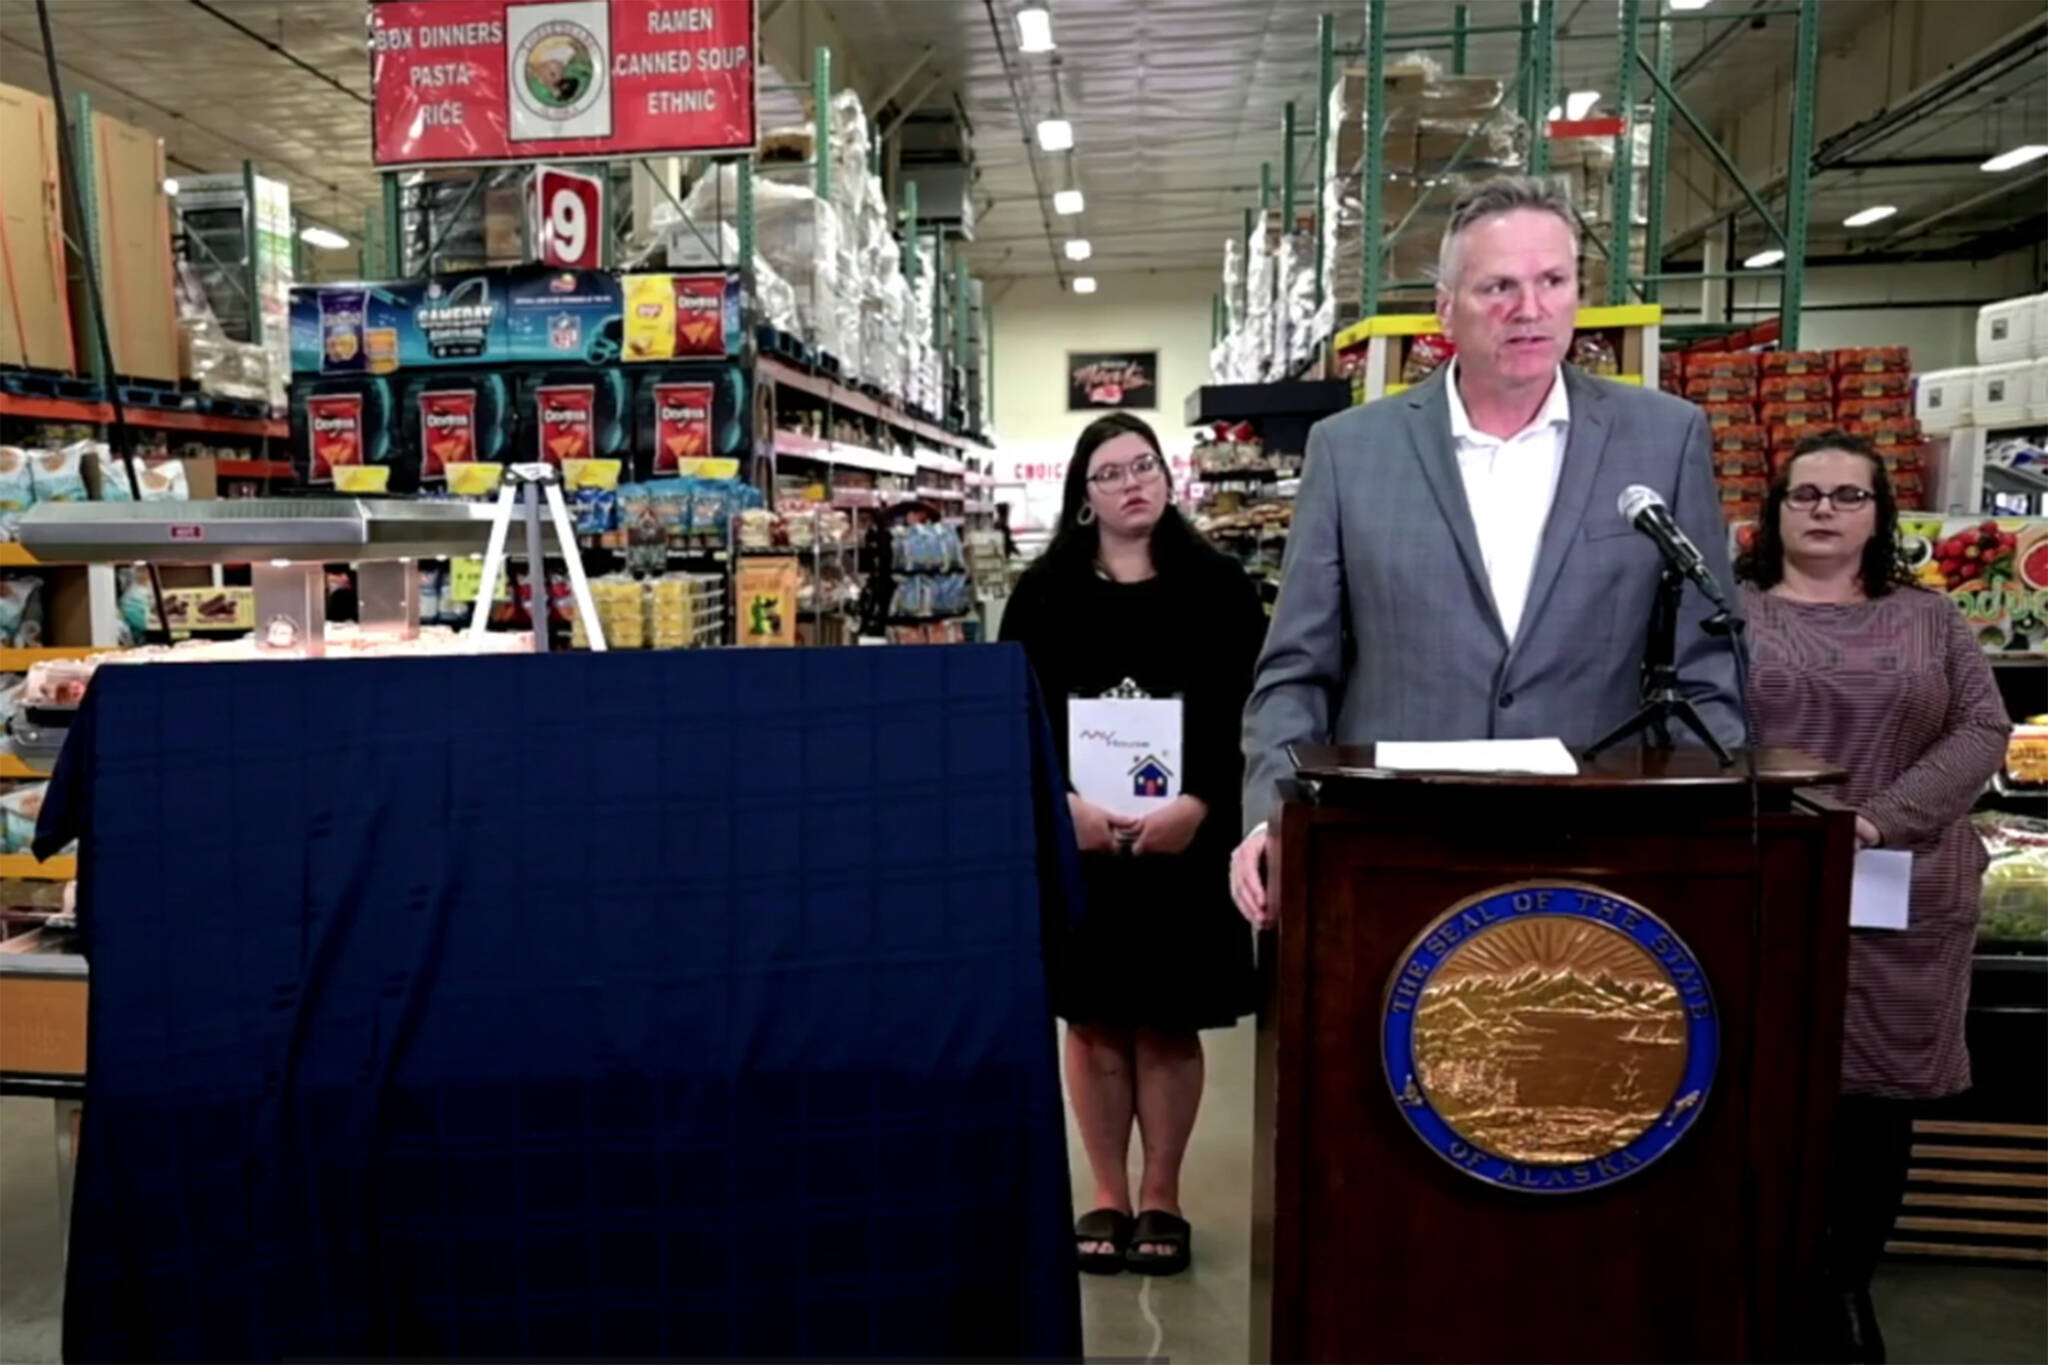 Gov. Mike Dunleavy stands at a lectern in a Three Bears Alaska store in Palmer, next to a giant, covered check displaying this year’s Permanent Fund dividend amount. Behind him stand Alaska resident Miranda Wagoner (left) and Jessica Viera, executive director, Wasilla Chamber of Commerce (right) who gave speeches at the event. (Faceboook live screenshot)